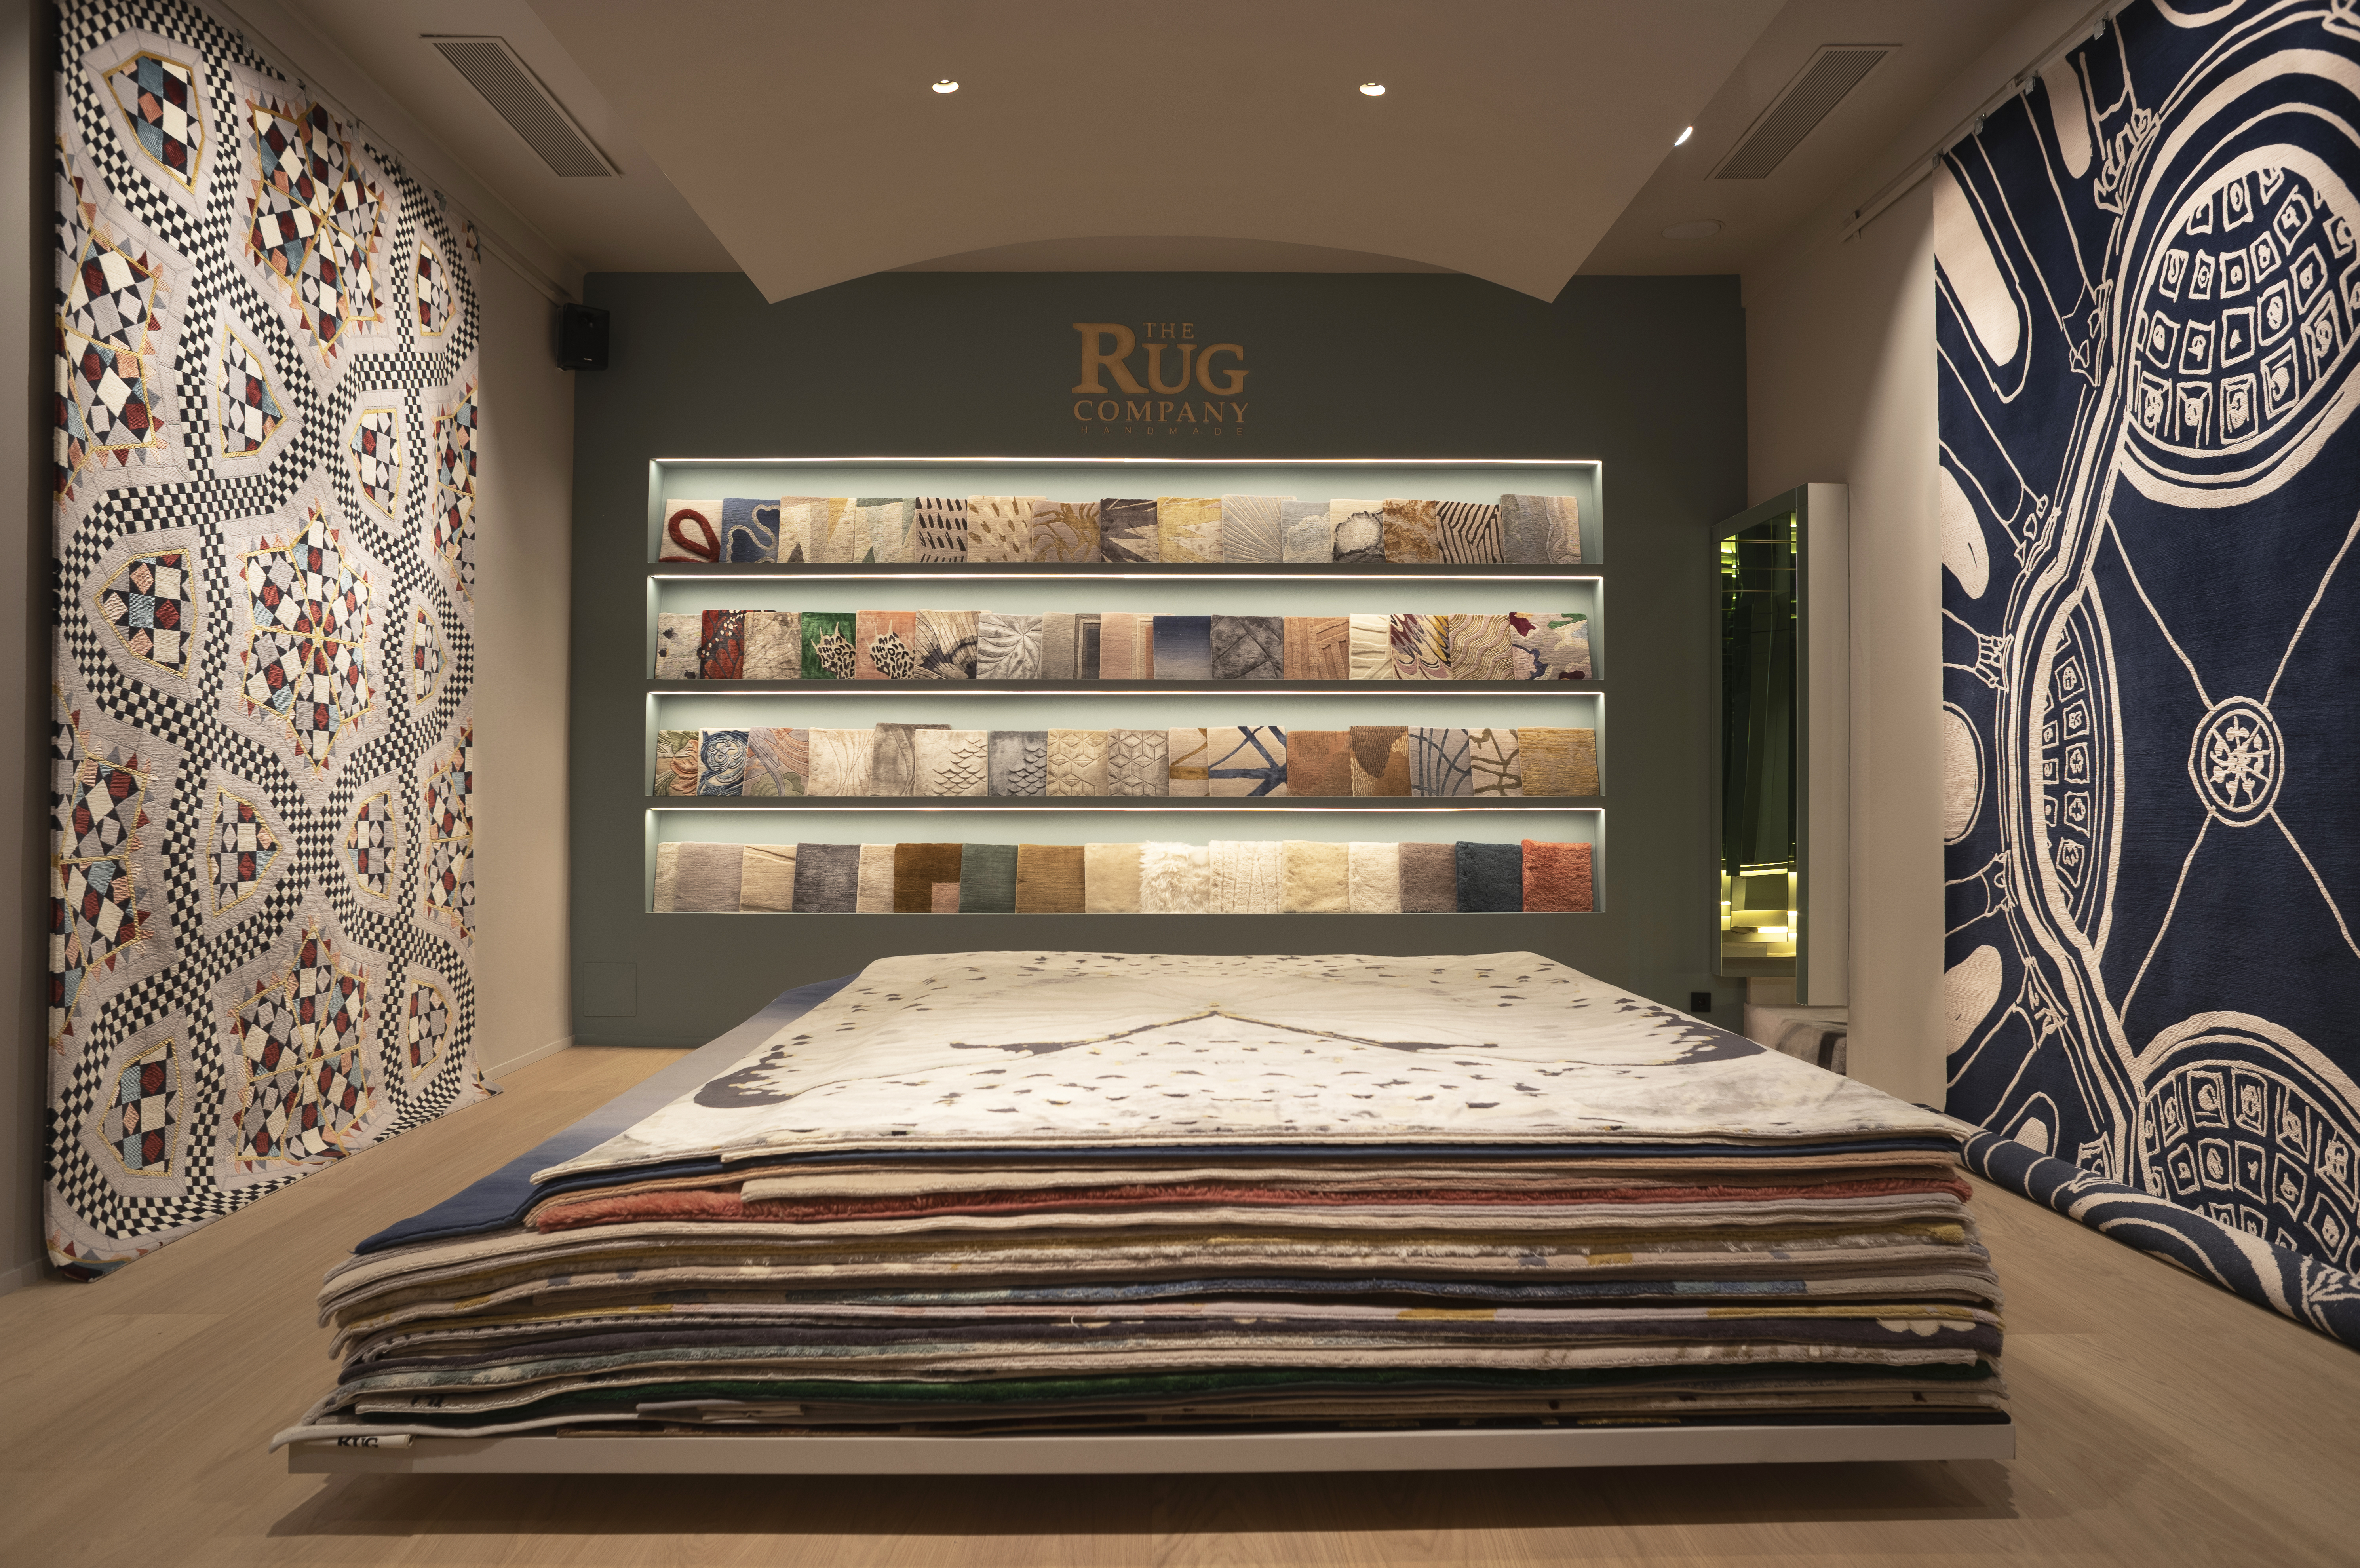 The Rug Company by BSB (Madrid, Spain)